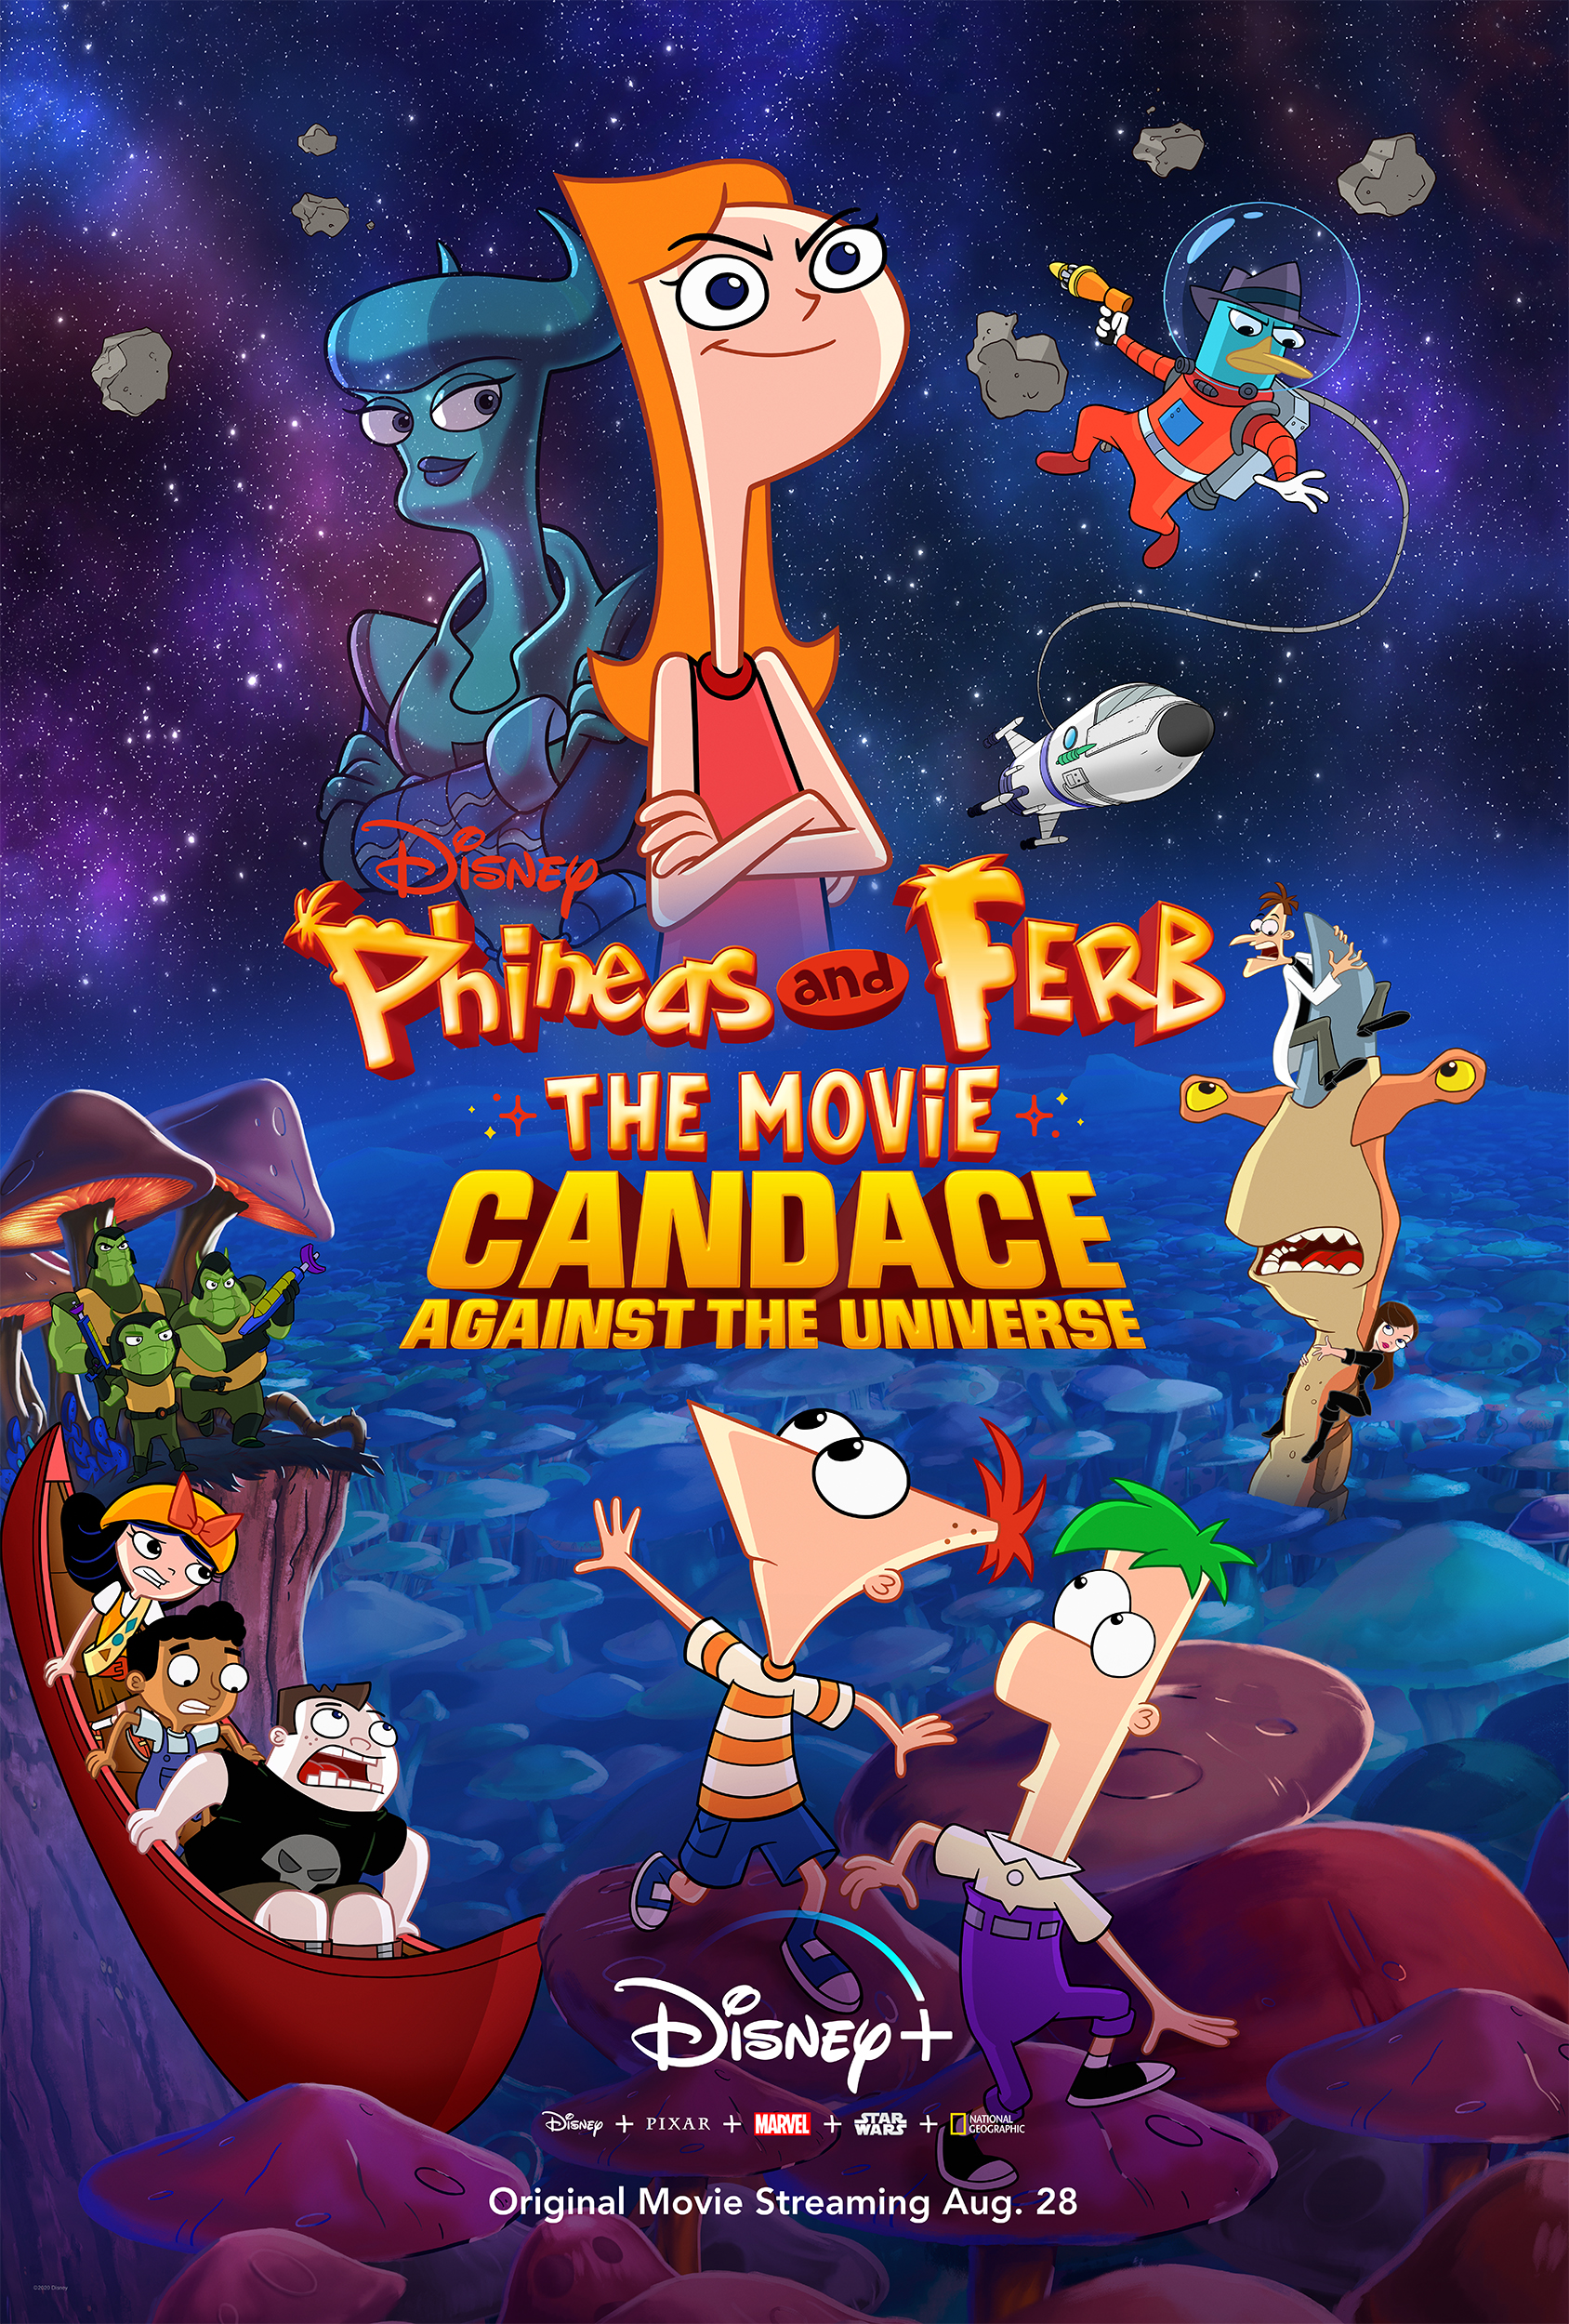 Phineas and Ferb the Movie- Candace Against the Universe (2020) - ดูหนังออนไลน